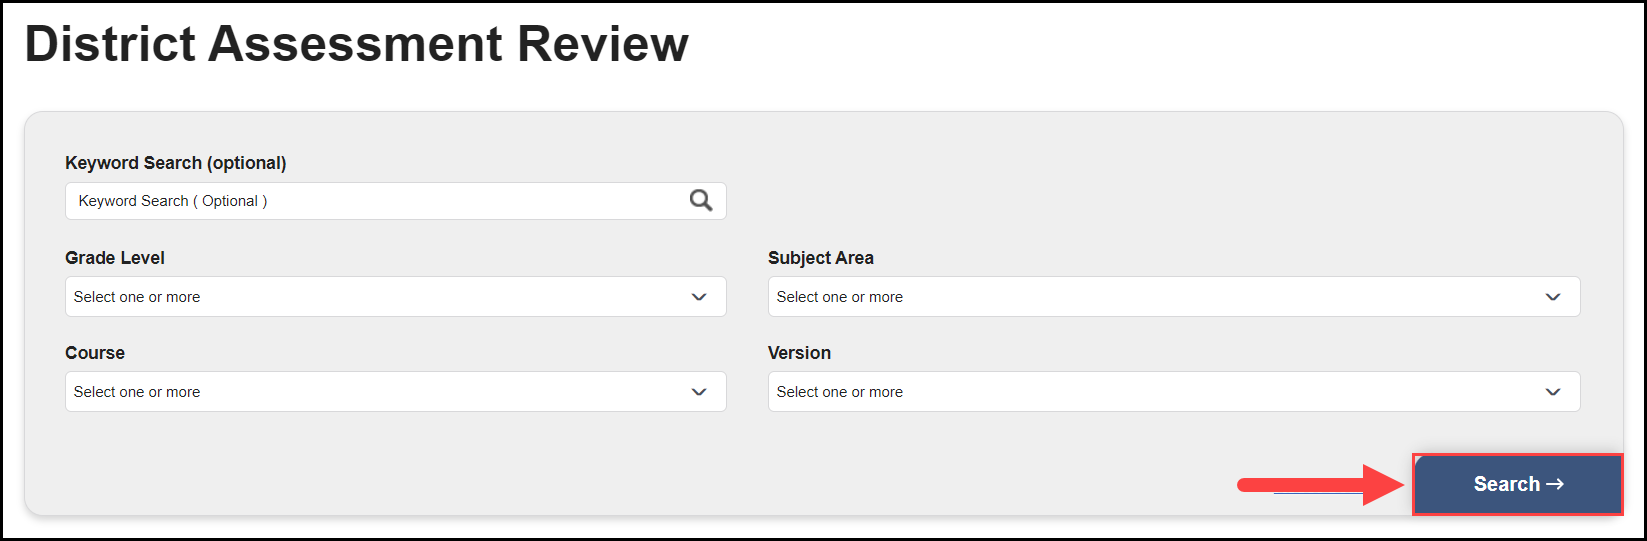 district assessment review search filters with an arrow pointing to the search button